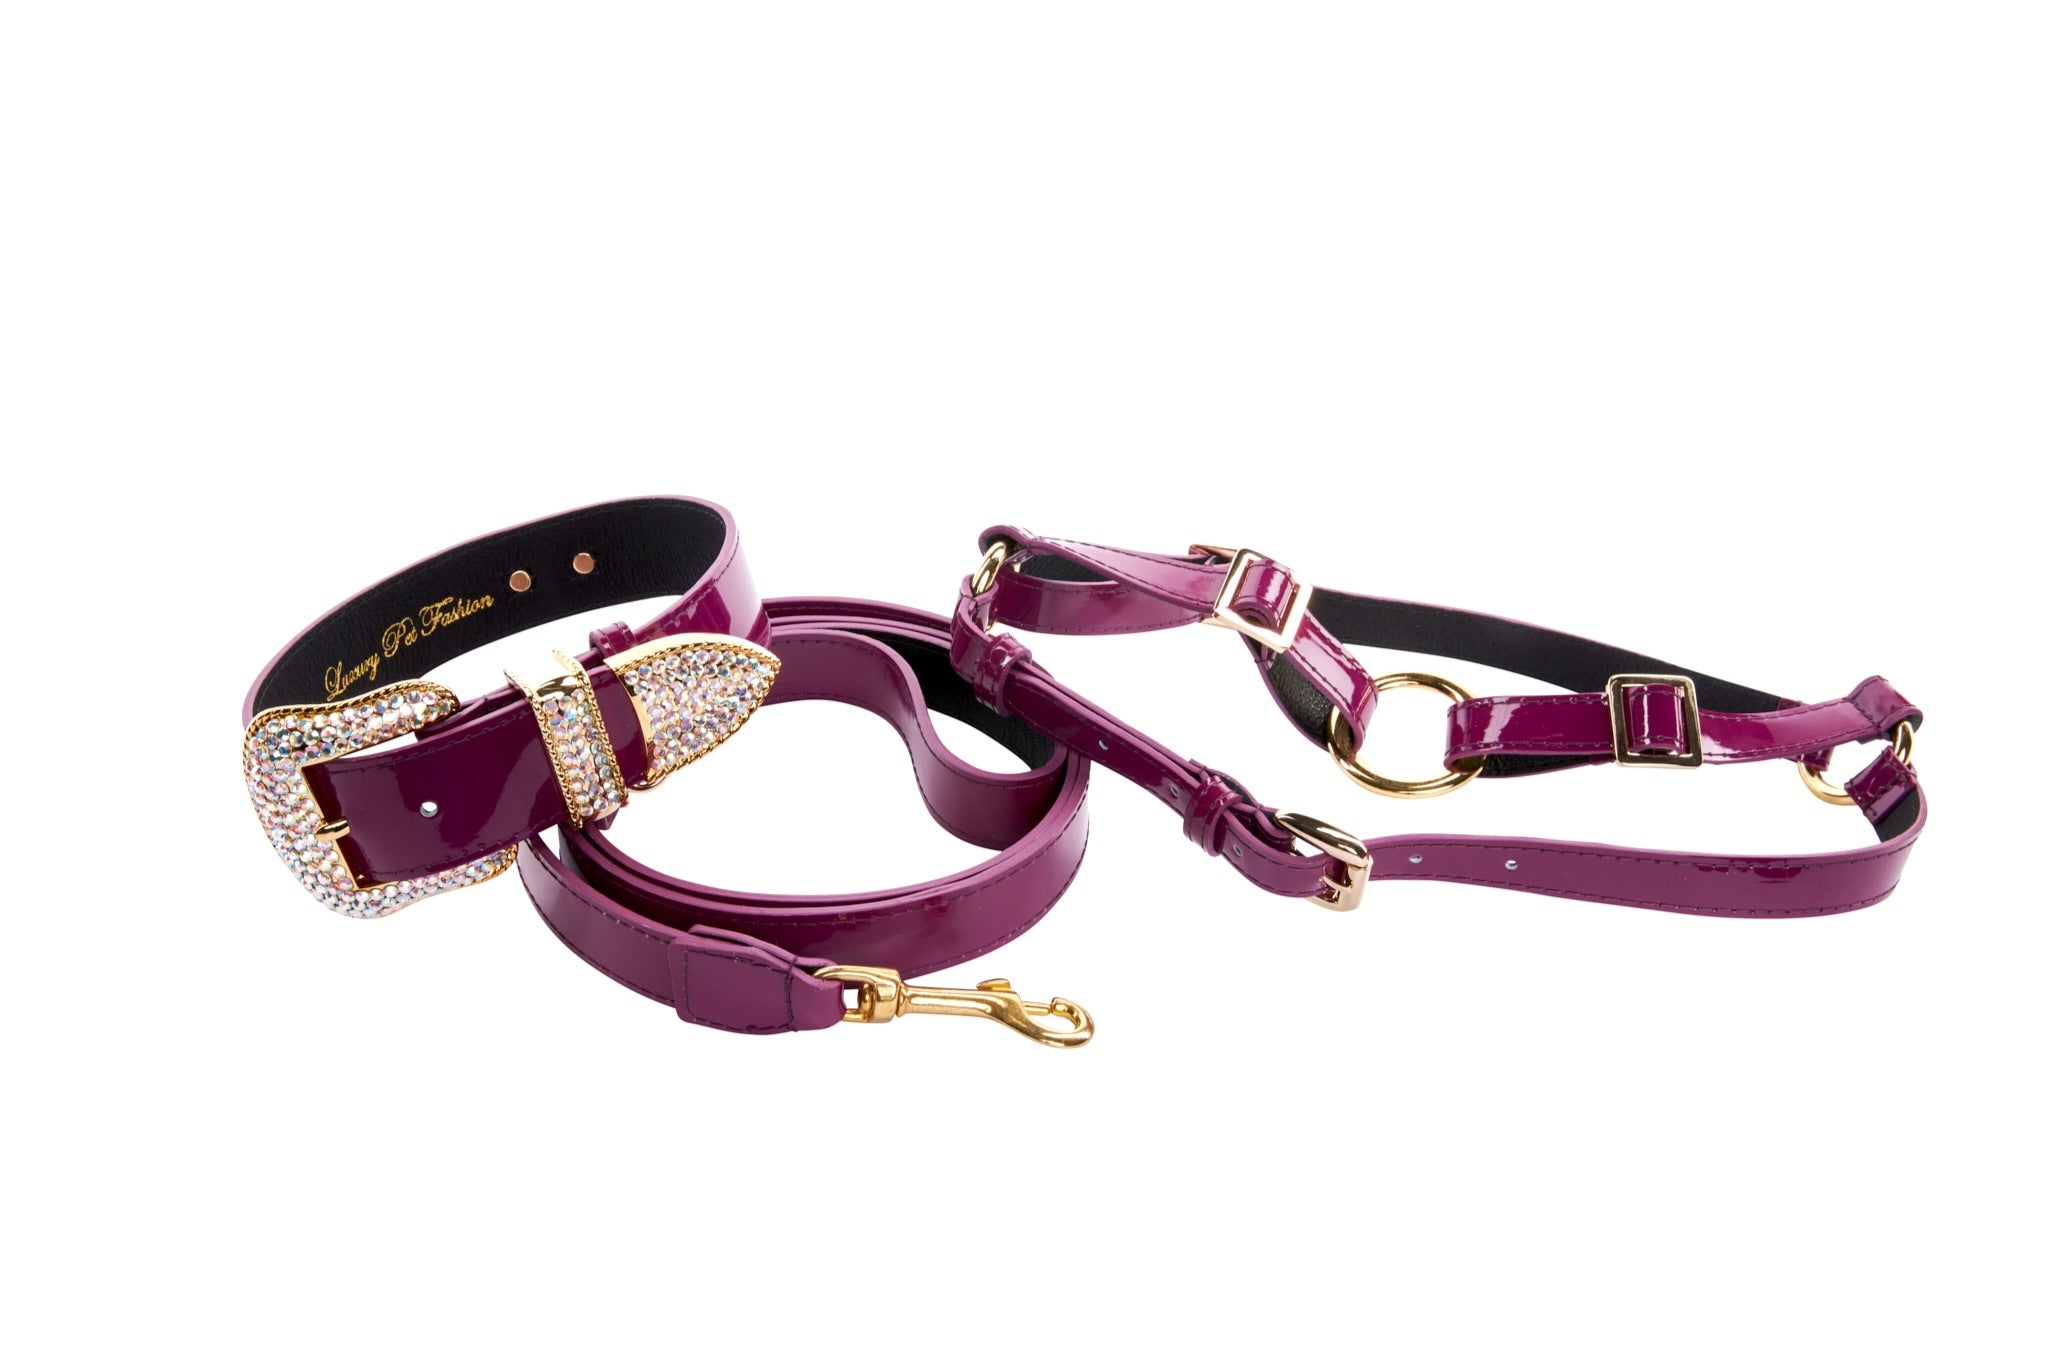 Luxury Harness For Dogs With Leash Set